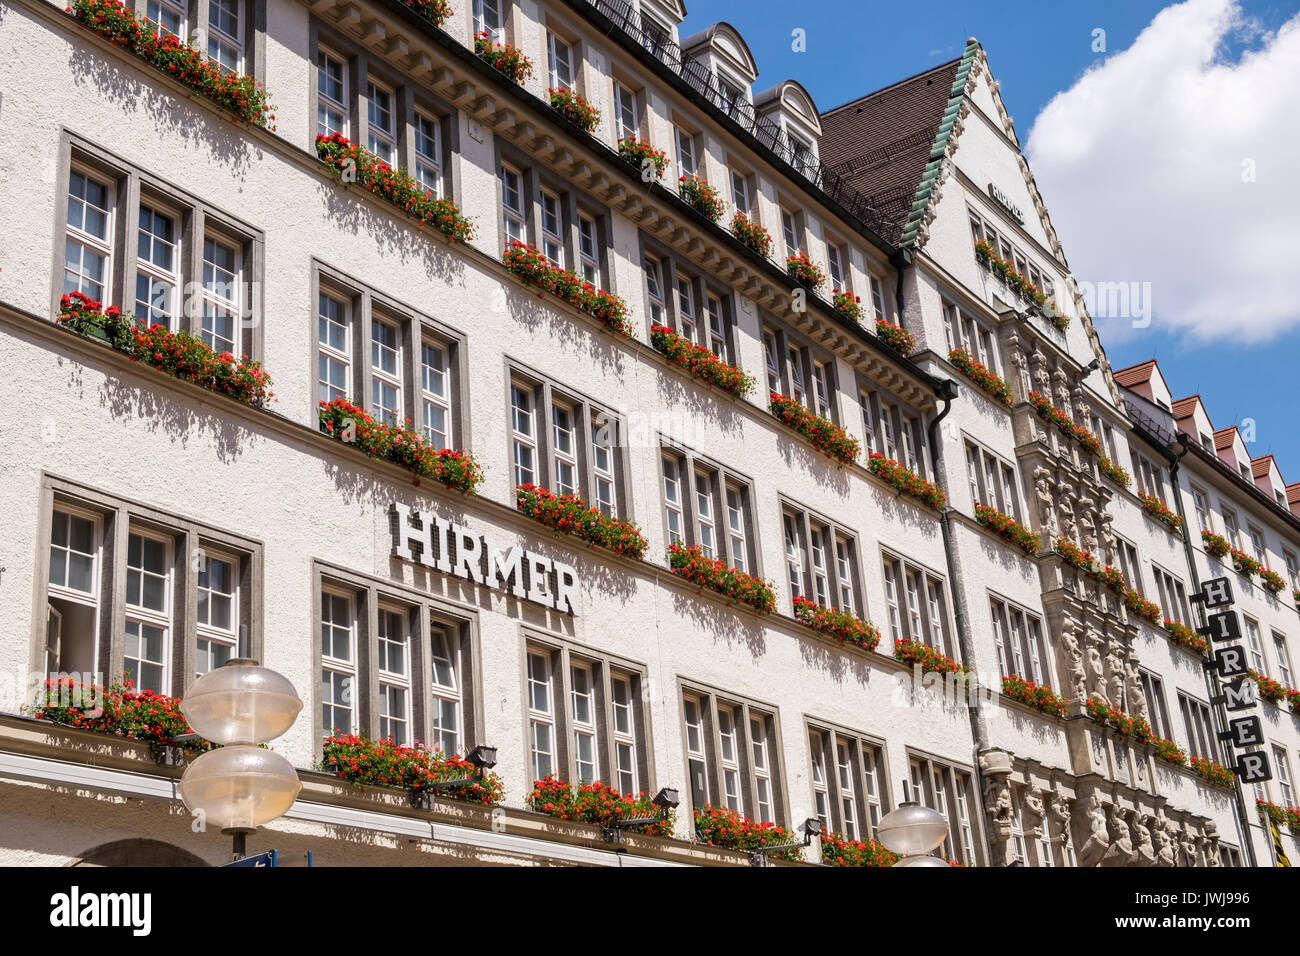 Facade of the Hirmer menswear store in central Munich, Bavaria, Germany Stock Photo